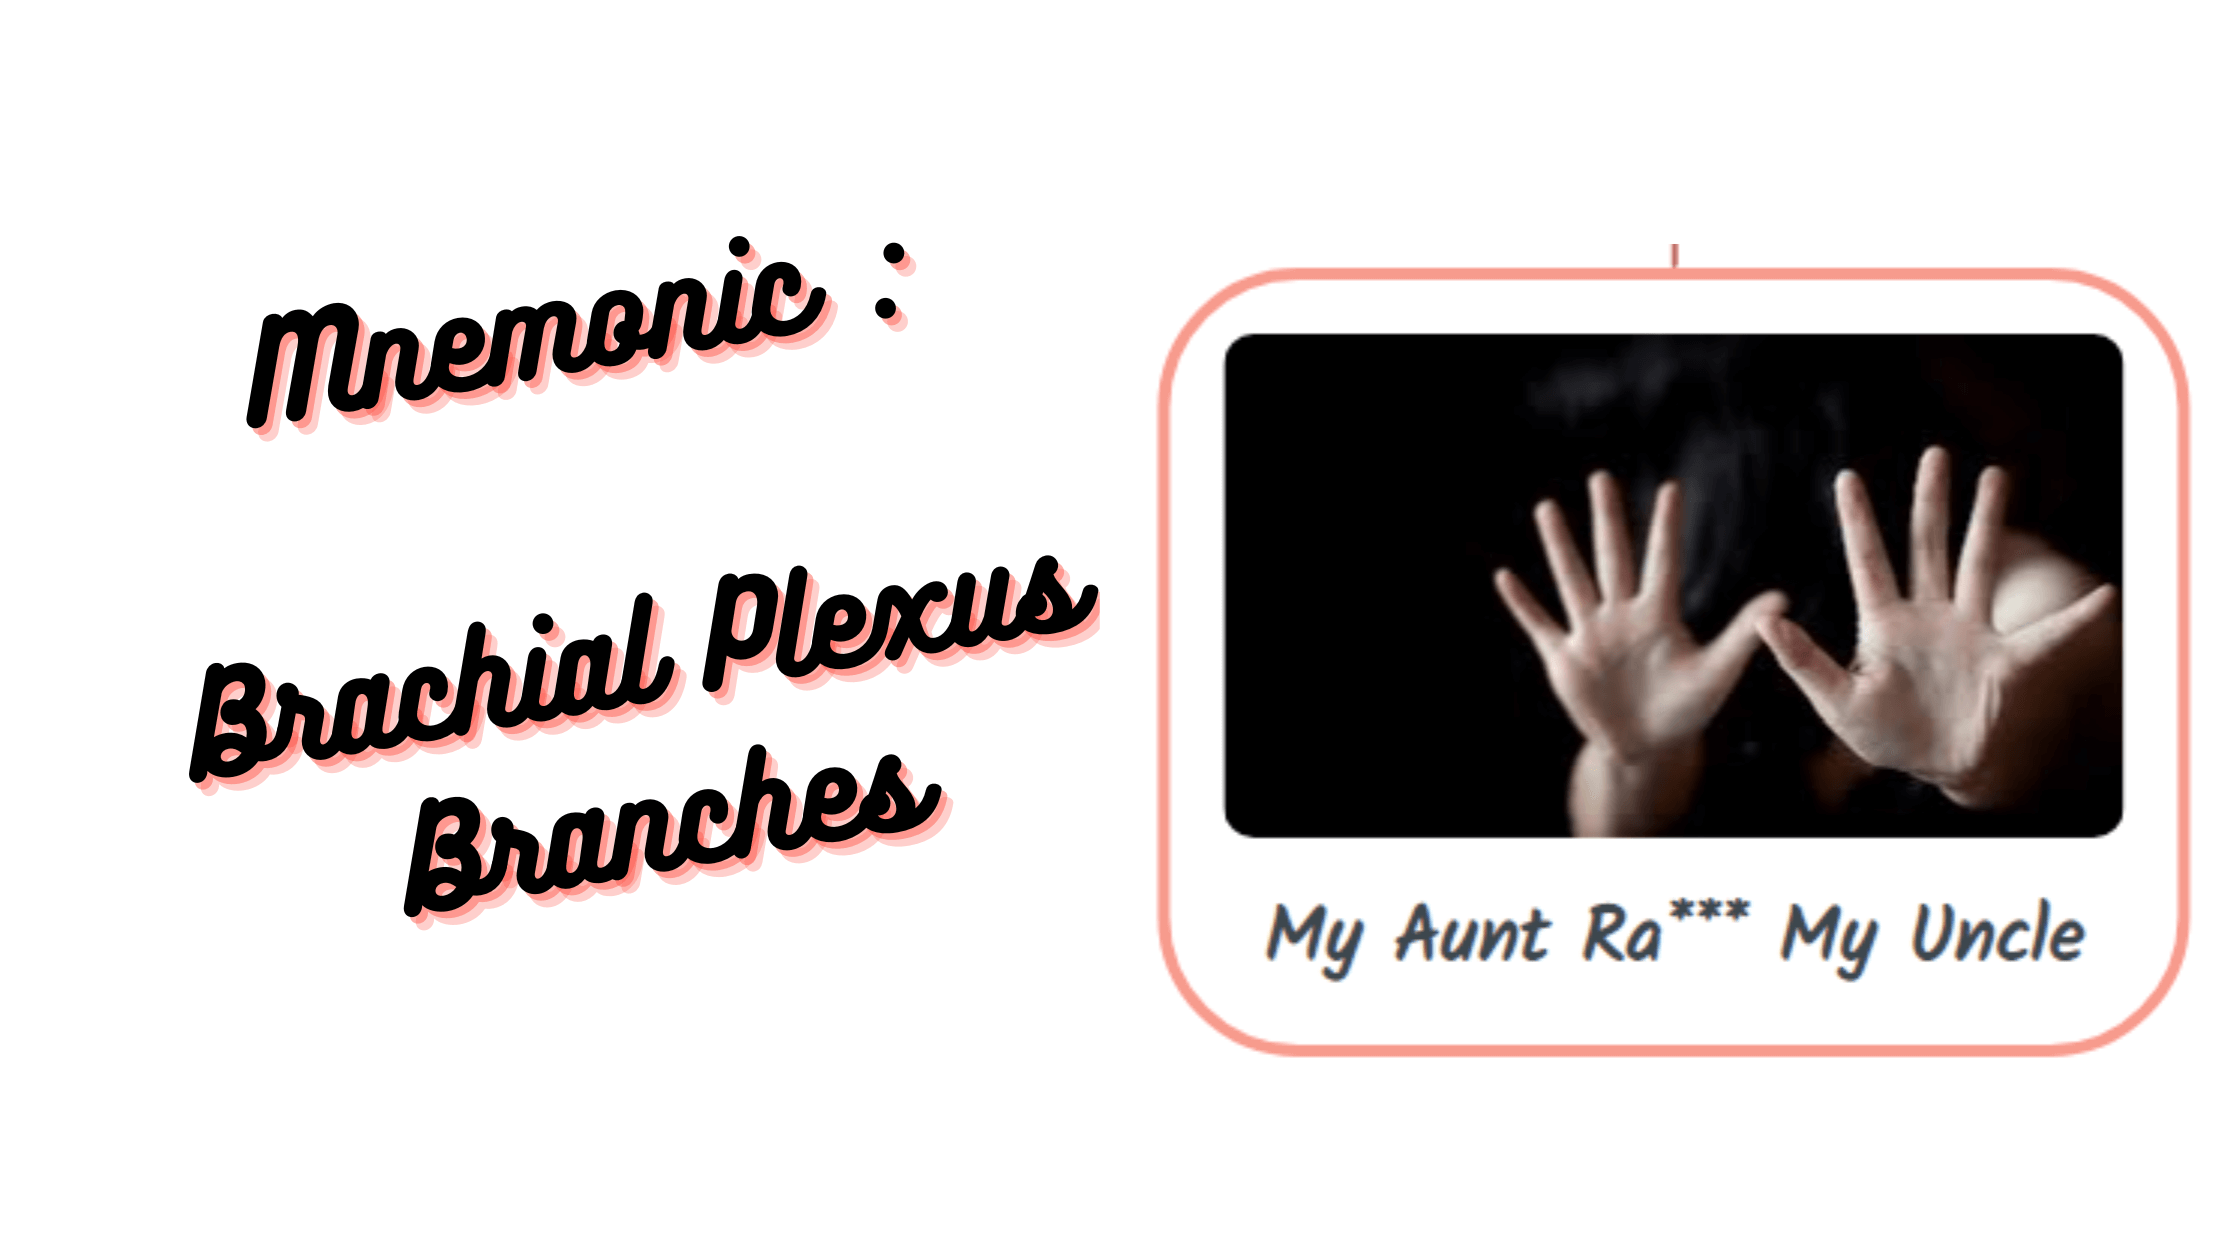 You are currently viewing Mnemonic :  Brachial Plexus Branches